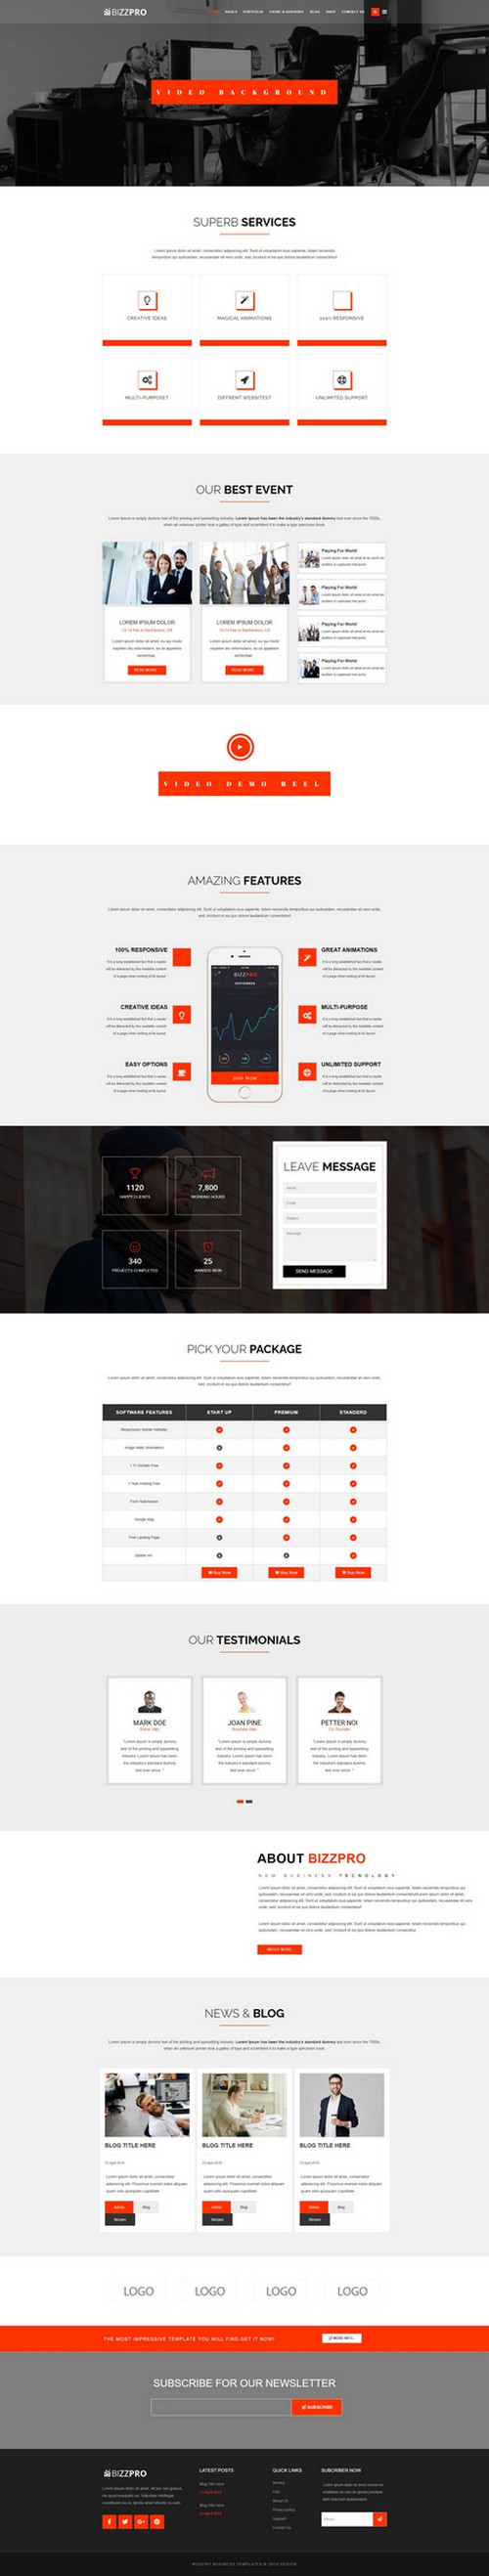 Bizzpro - Multipages Business Joomla Template